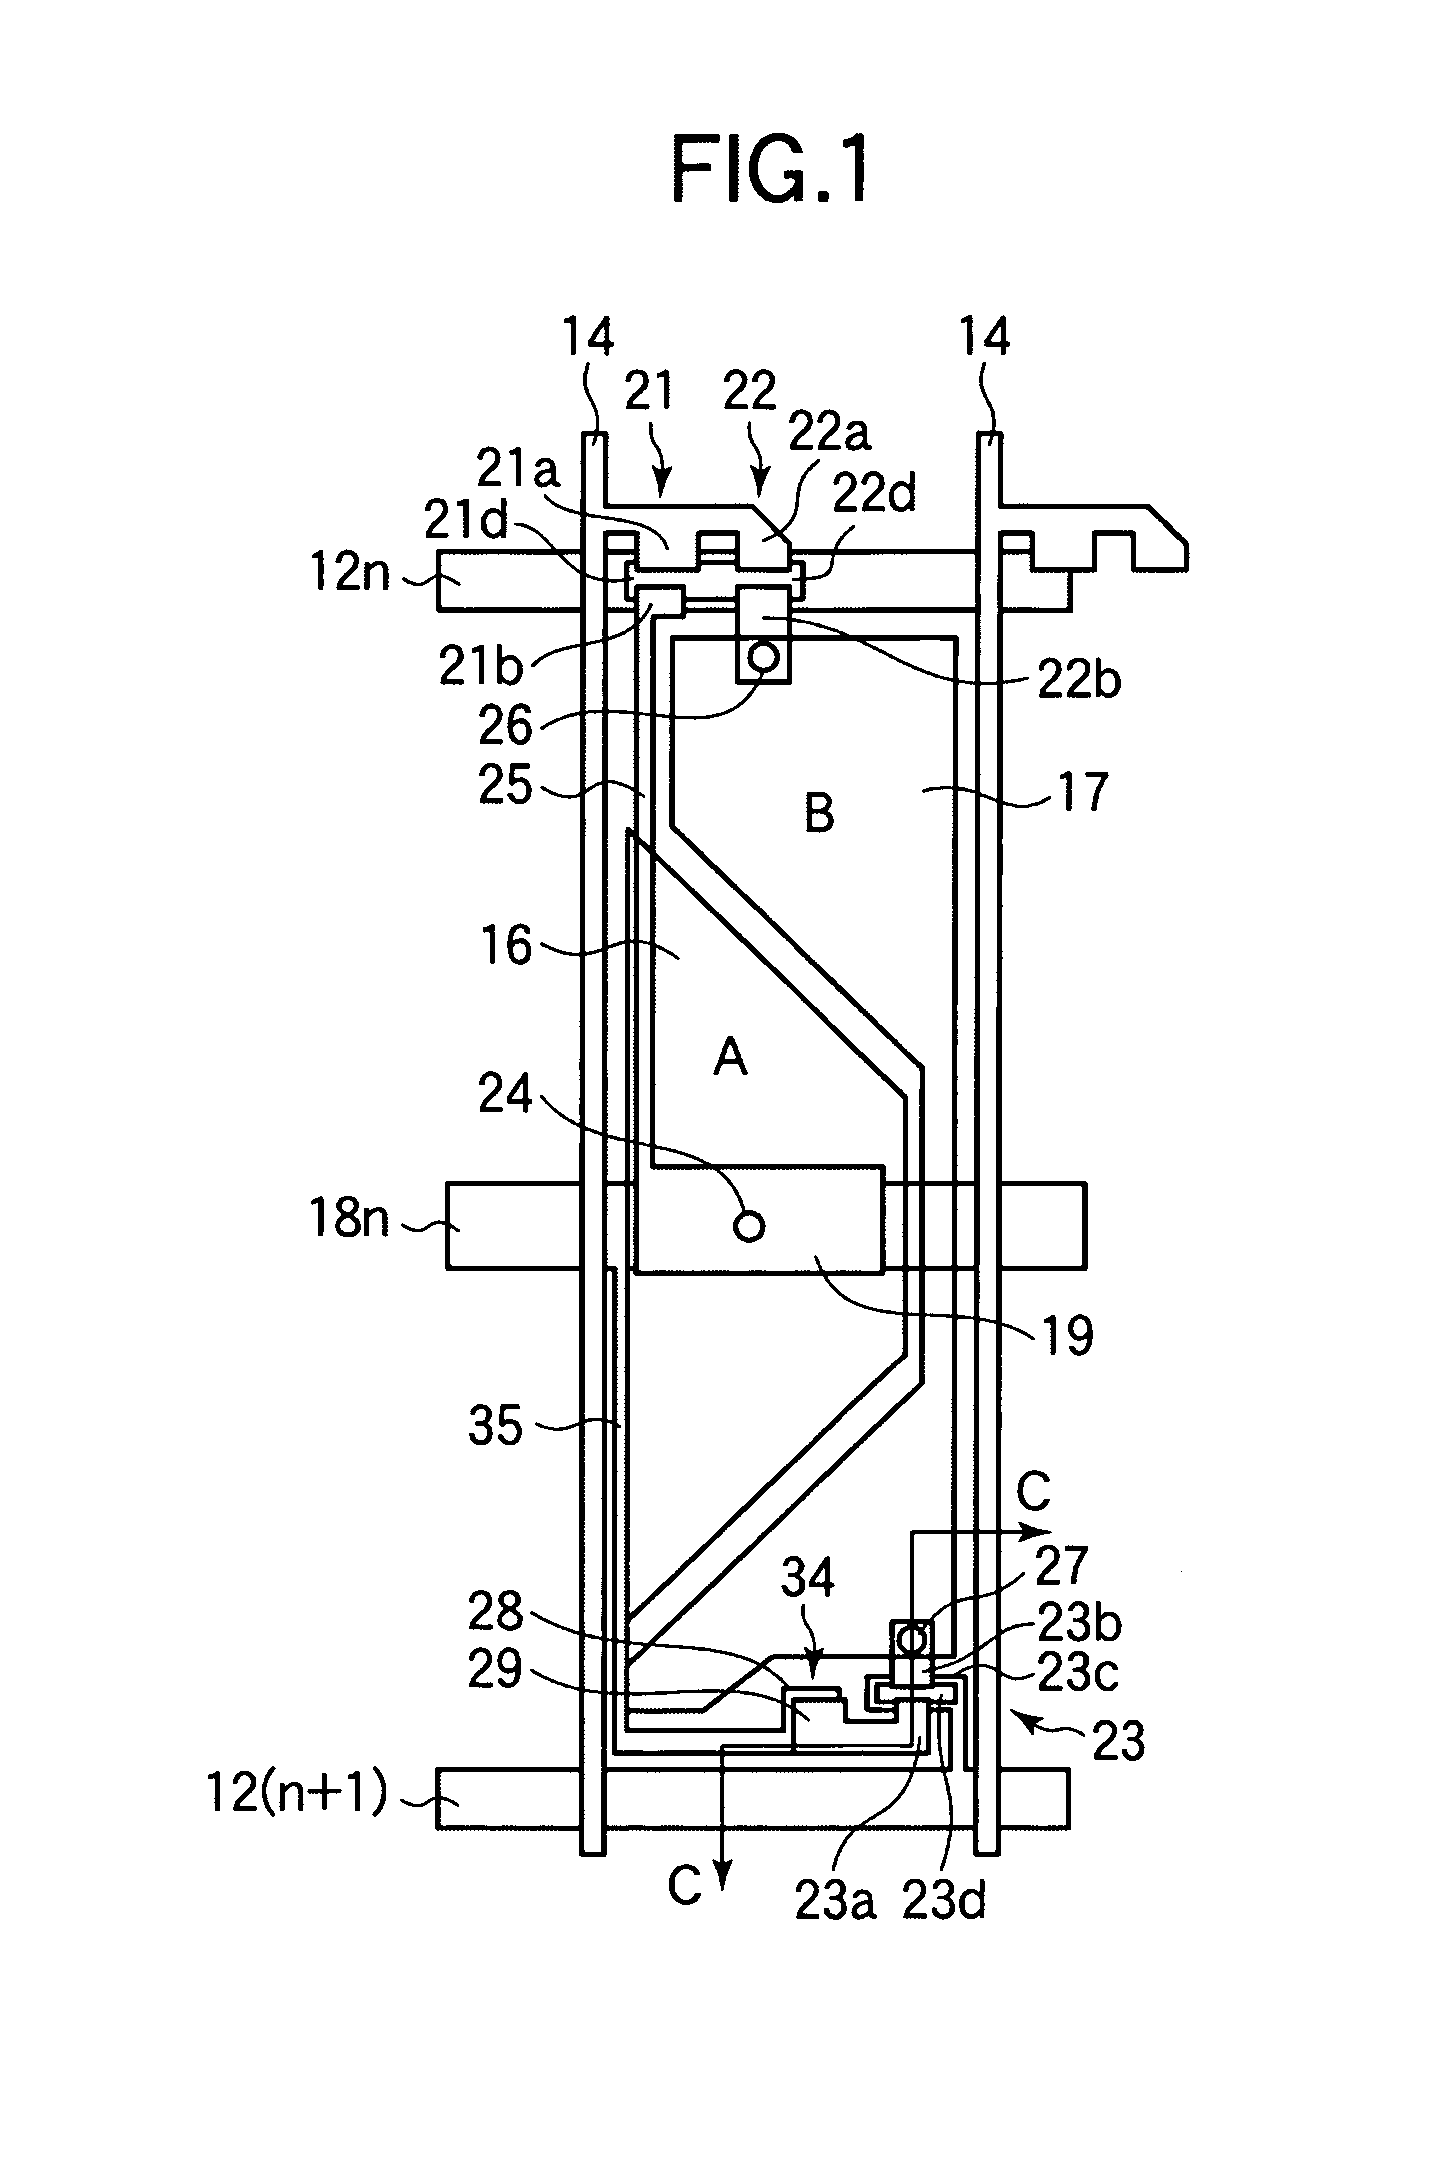 LCD device comprising an overlap between the first and second buffer capacitance electrodes